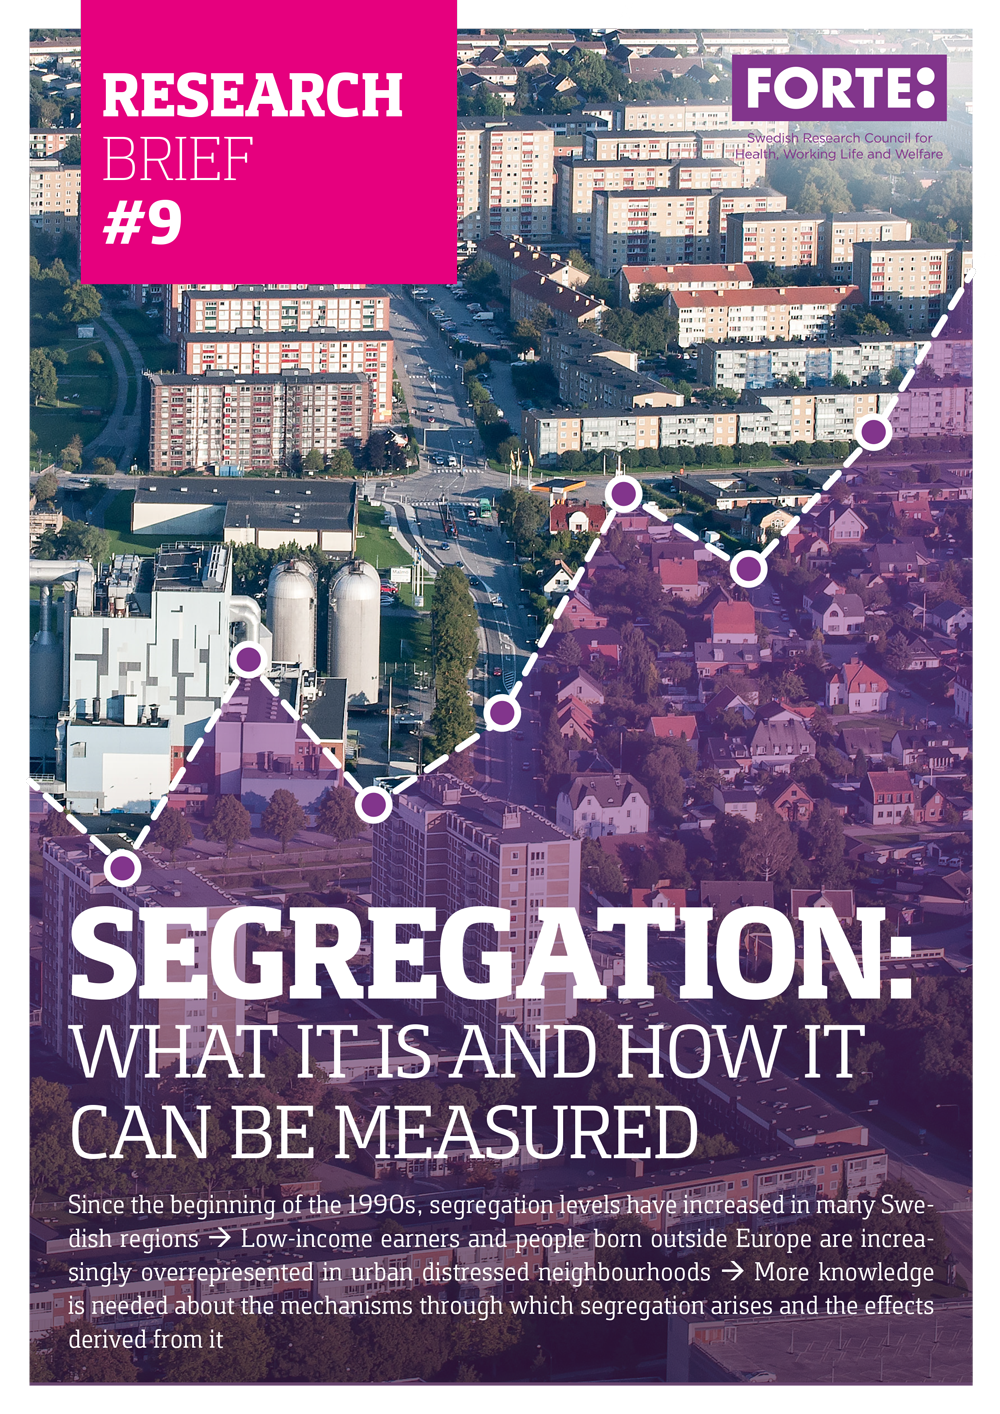 Research brief: Segregation - What it is and how it can be measured